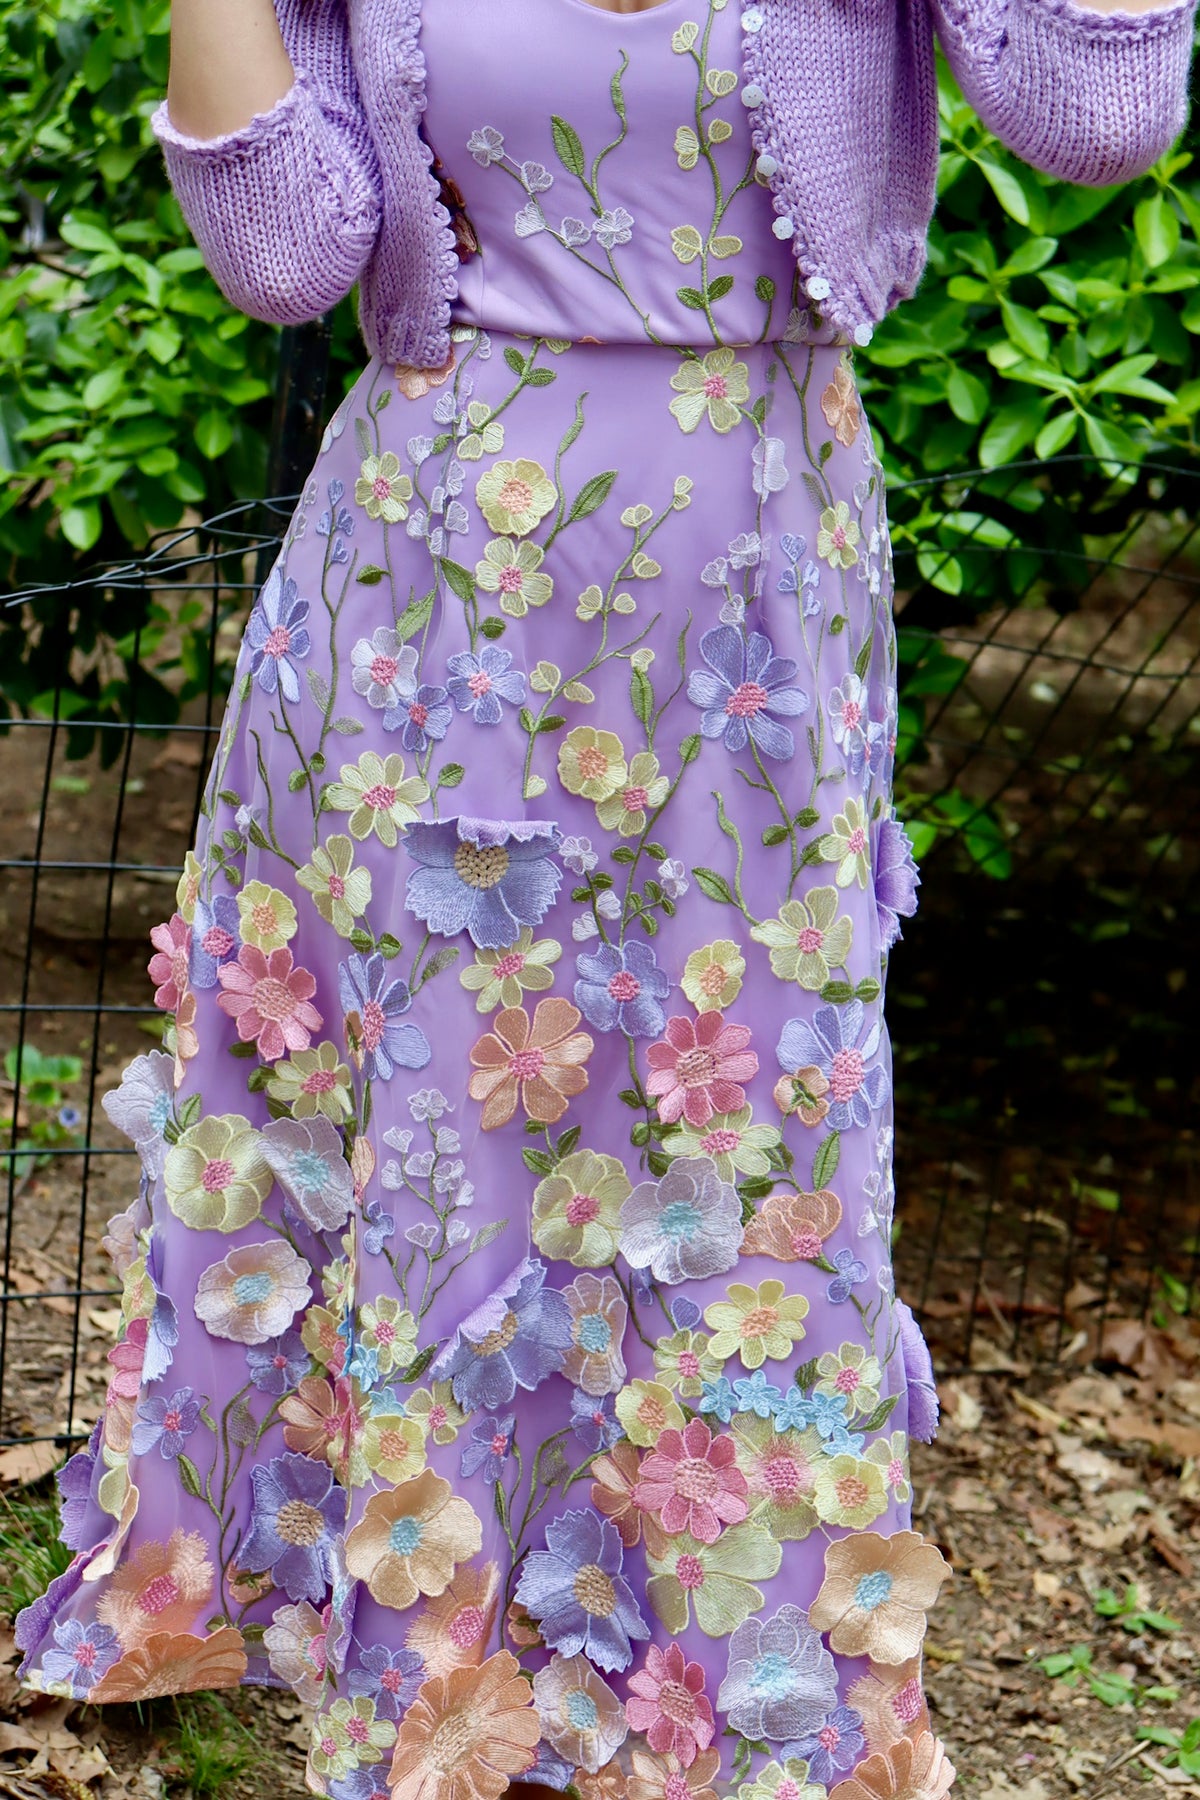 Up close and zoomed in image of lilac midi length satin floral appliquéd dress with blush pink and yellow flowers.